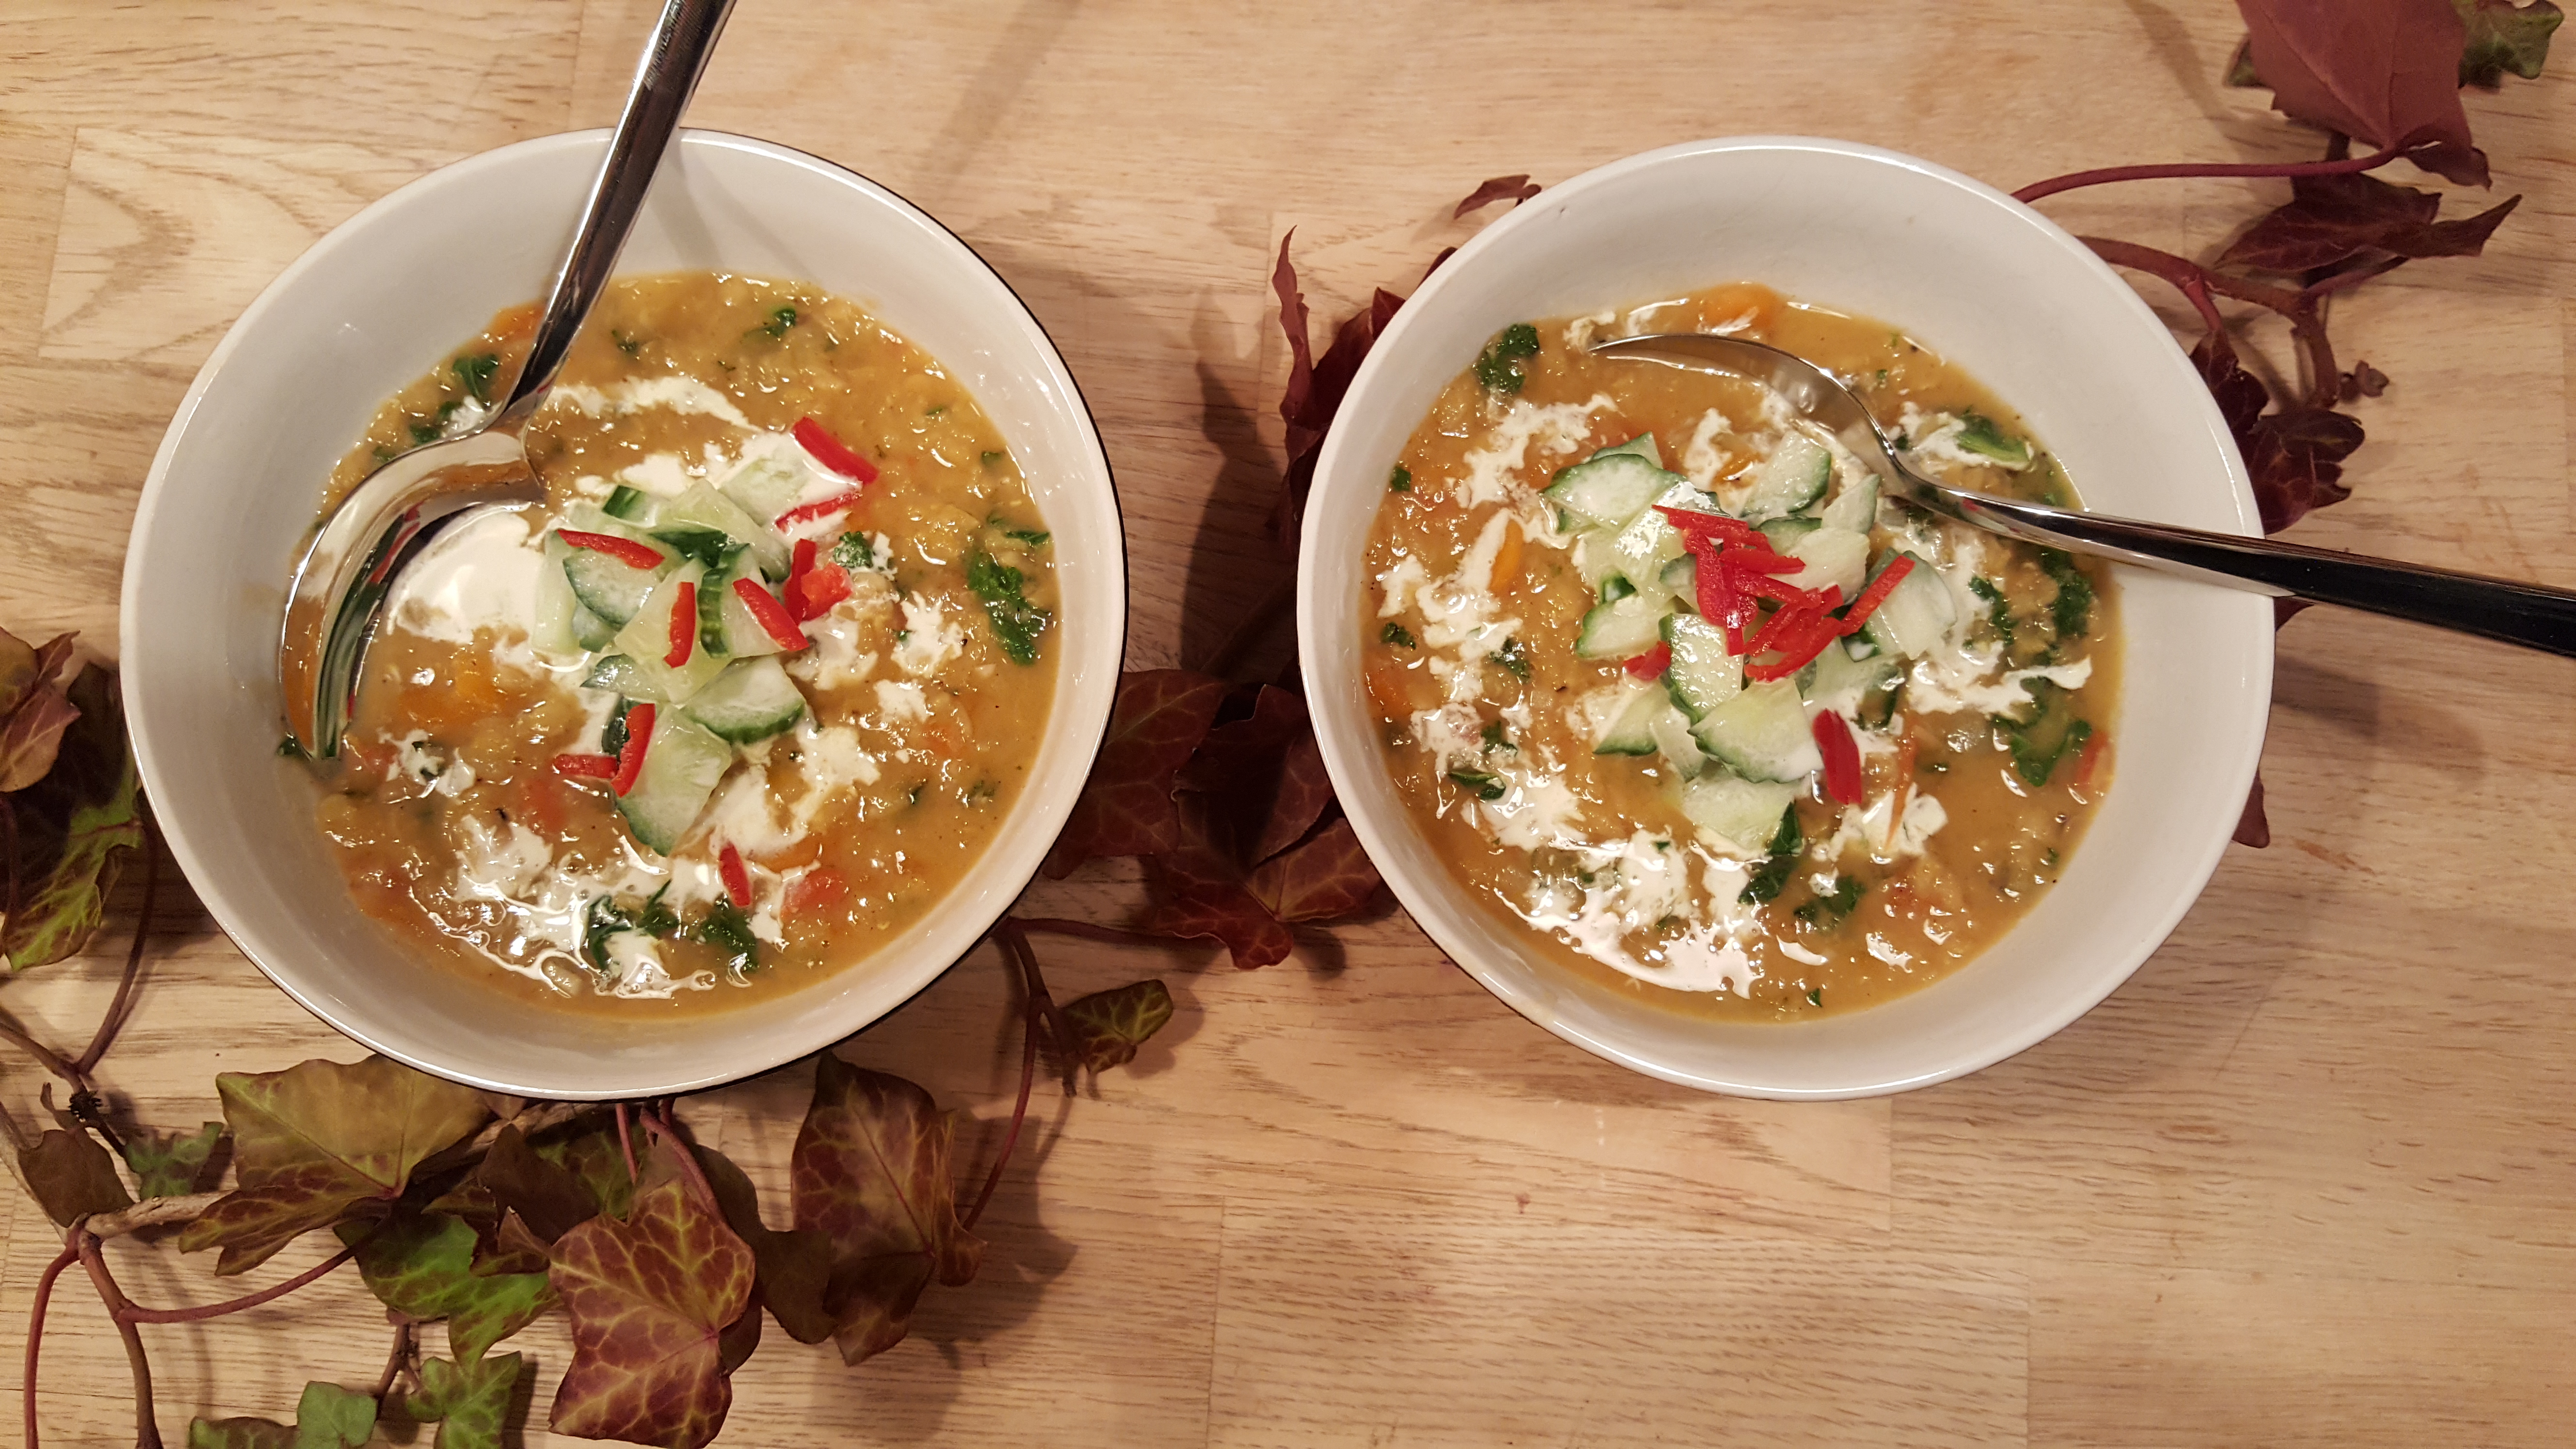 Spicy bombay-linsesuppe